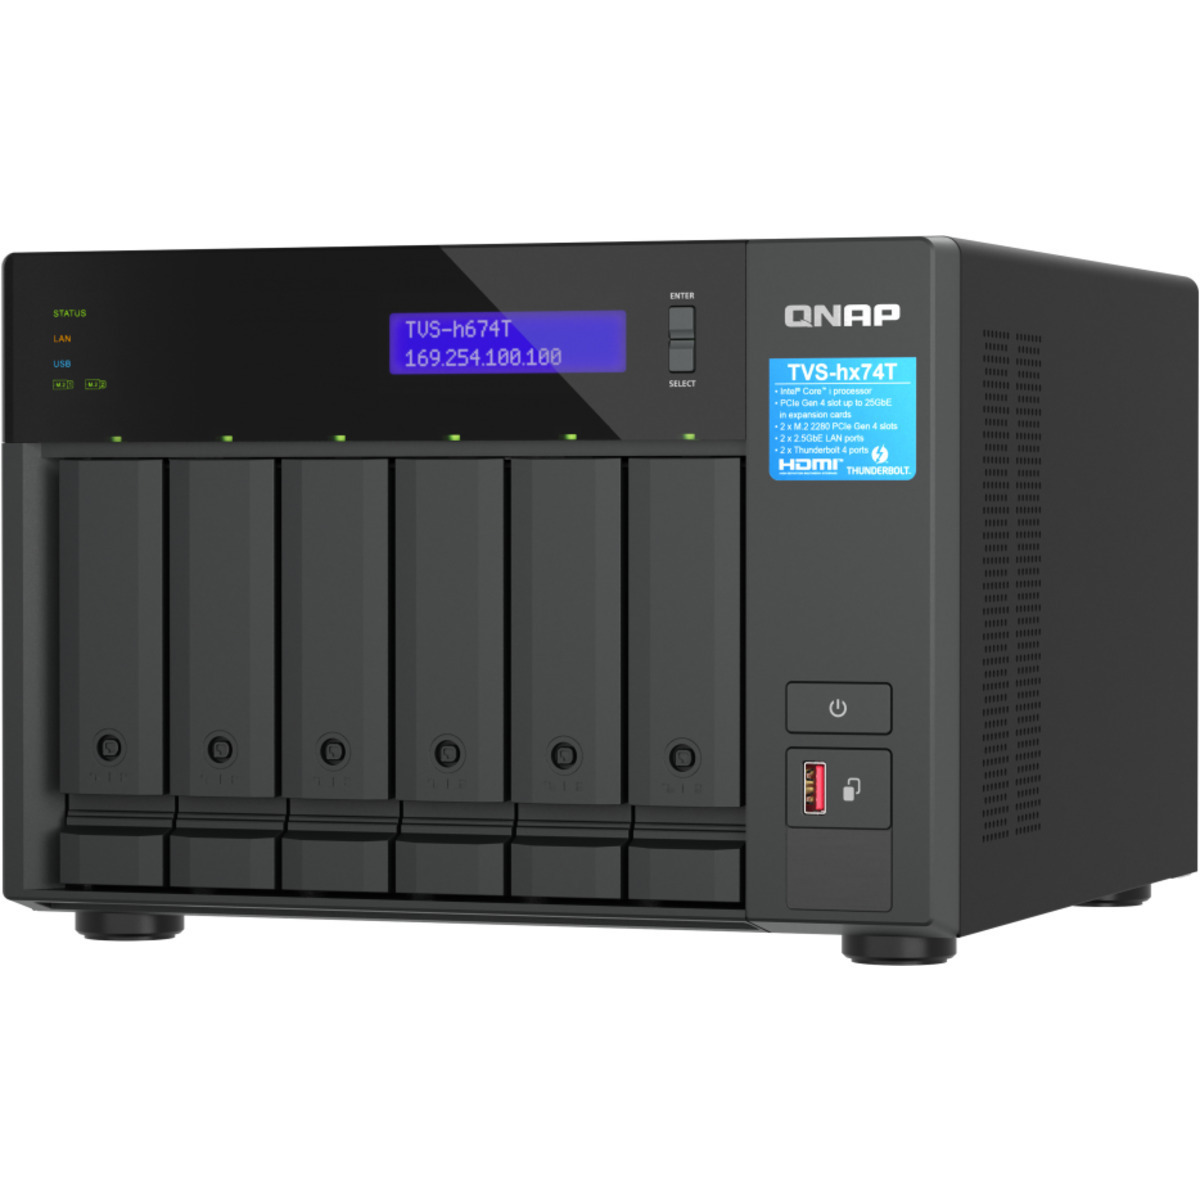 buy QNAP TVS-h674T Core i5 Thunderbolt 4 24tb Desktop DAS-NAS - Combo Direct + Network Storage Device 6x4000gb Seagate BarraCuda ST4000DM004 3.5 7200rpm SATA 6Gb/s HDD CONSUMER Class Drives Installed - Burn-In Tested - nas headquarters buy network attached storage server device das new raid-5 free shipping usa spring sale TVS-h674T Core i5 Thunderbolt 4